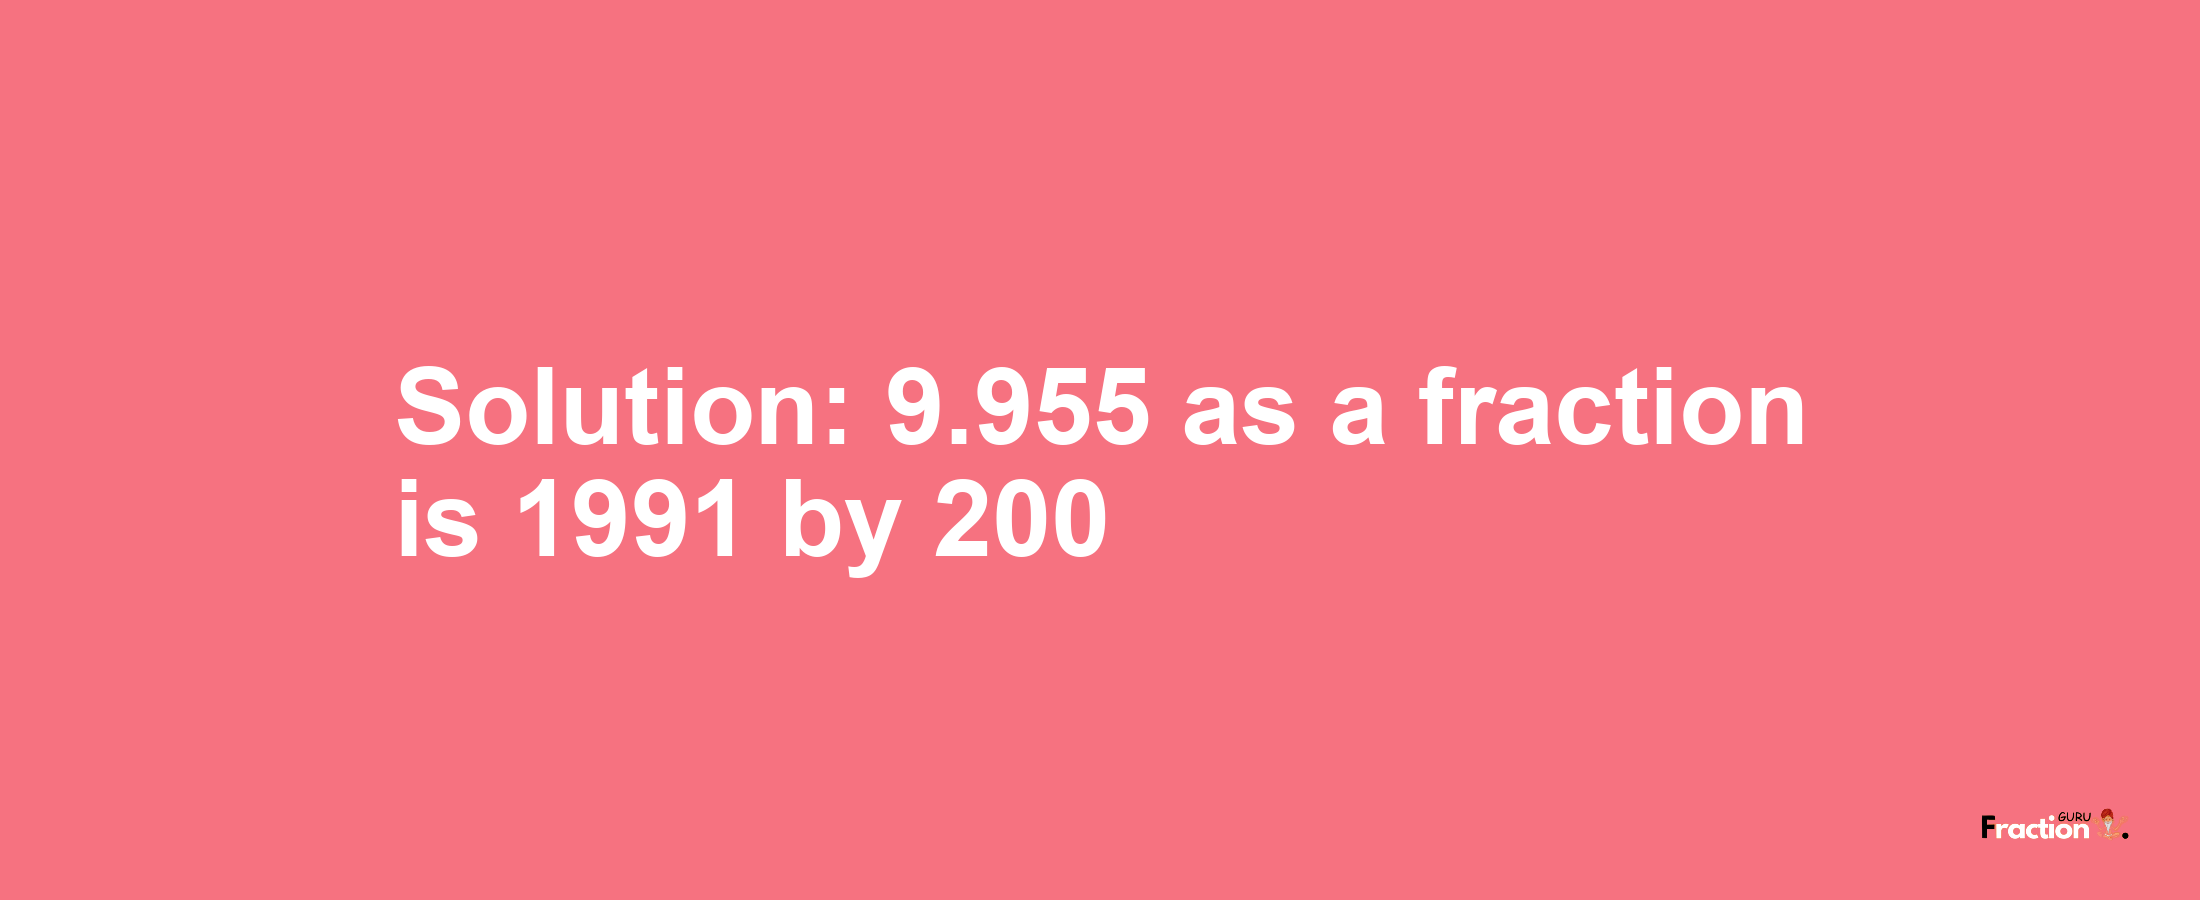 Solution:9.955 as a fraction is 1991/200